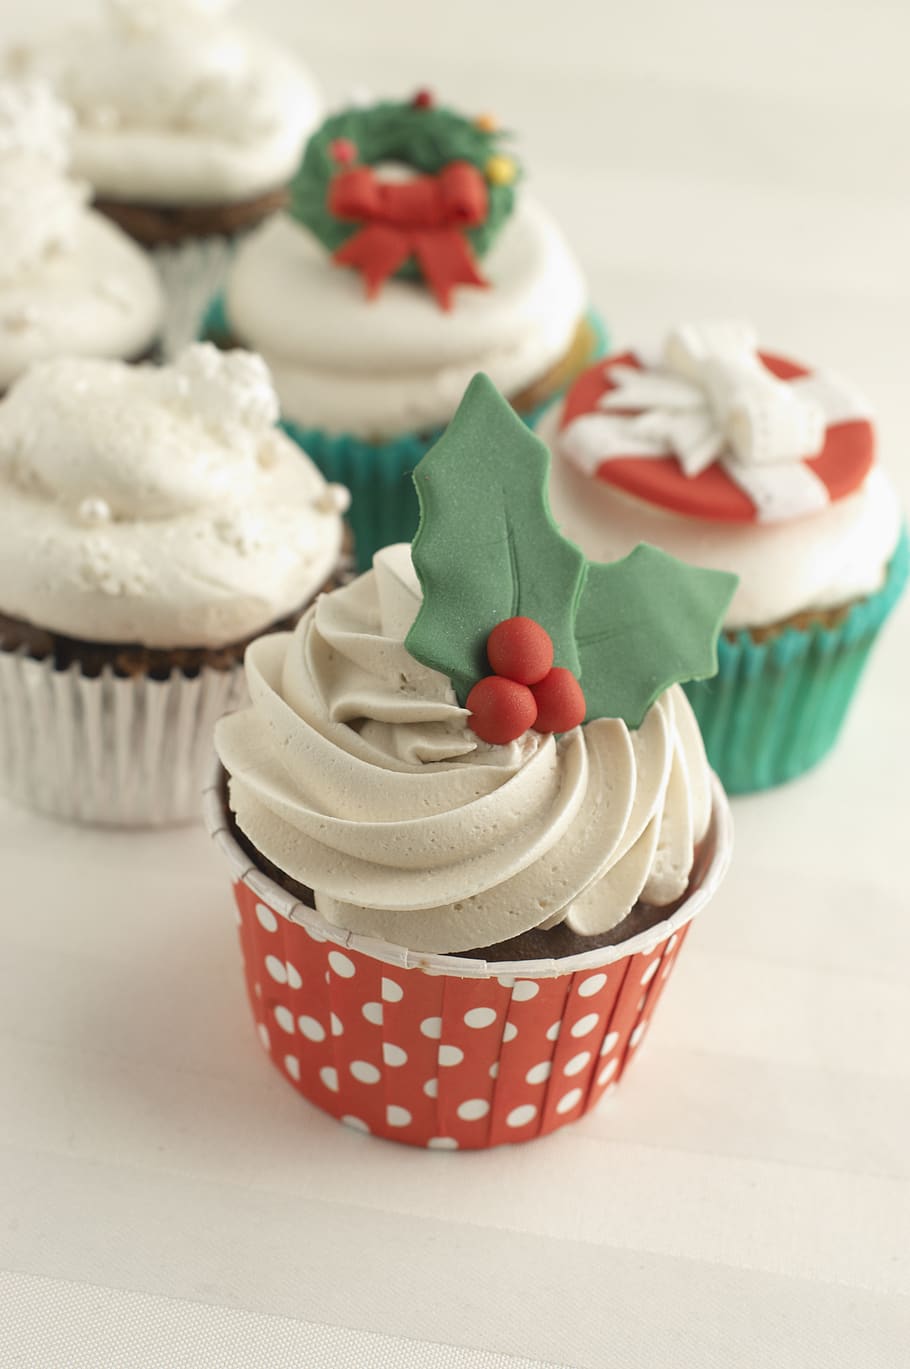 holiday, cupcakes, dessert, christmas, chocolate, sweet, baked, frosting, cake, cream